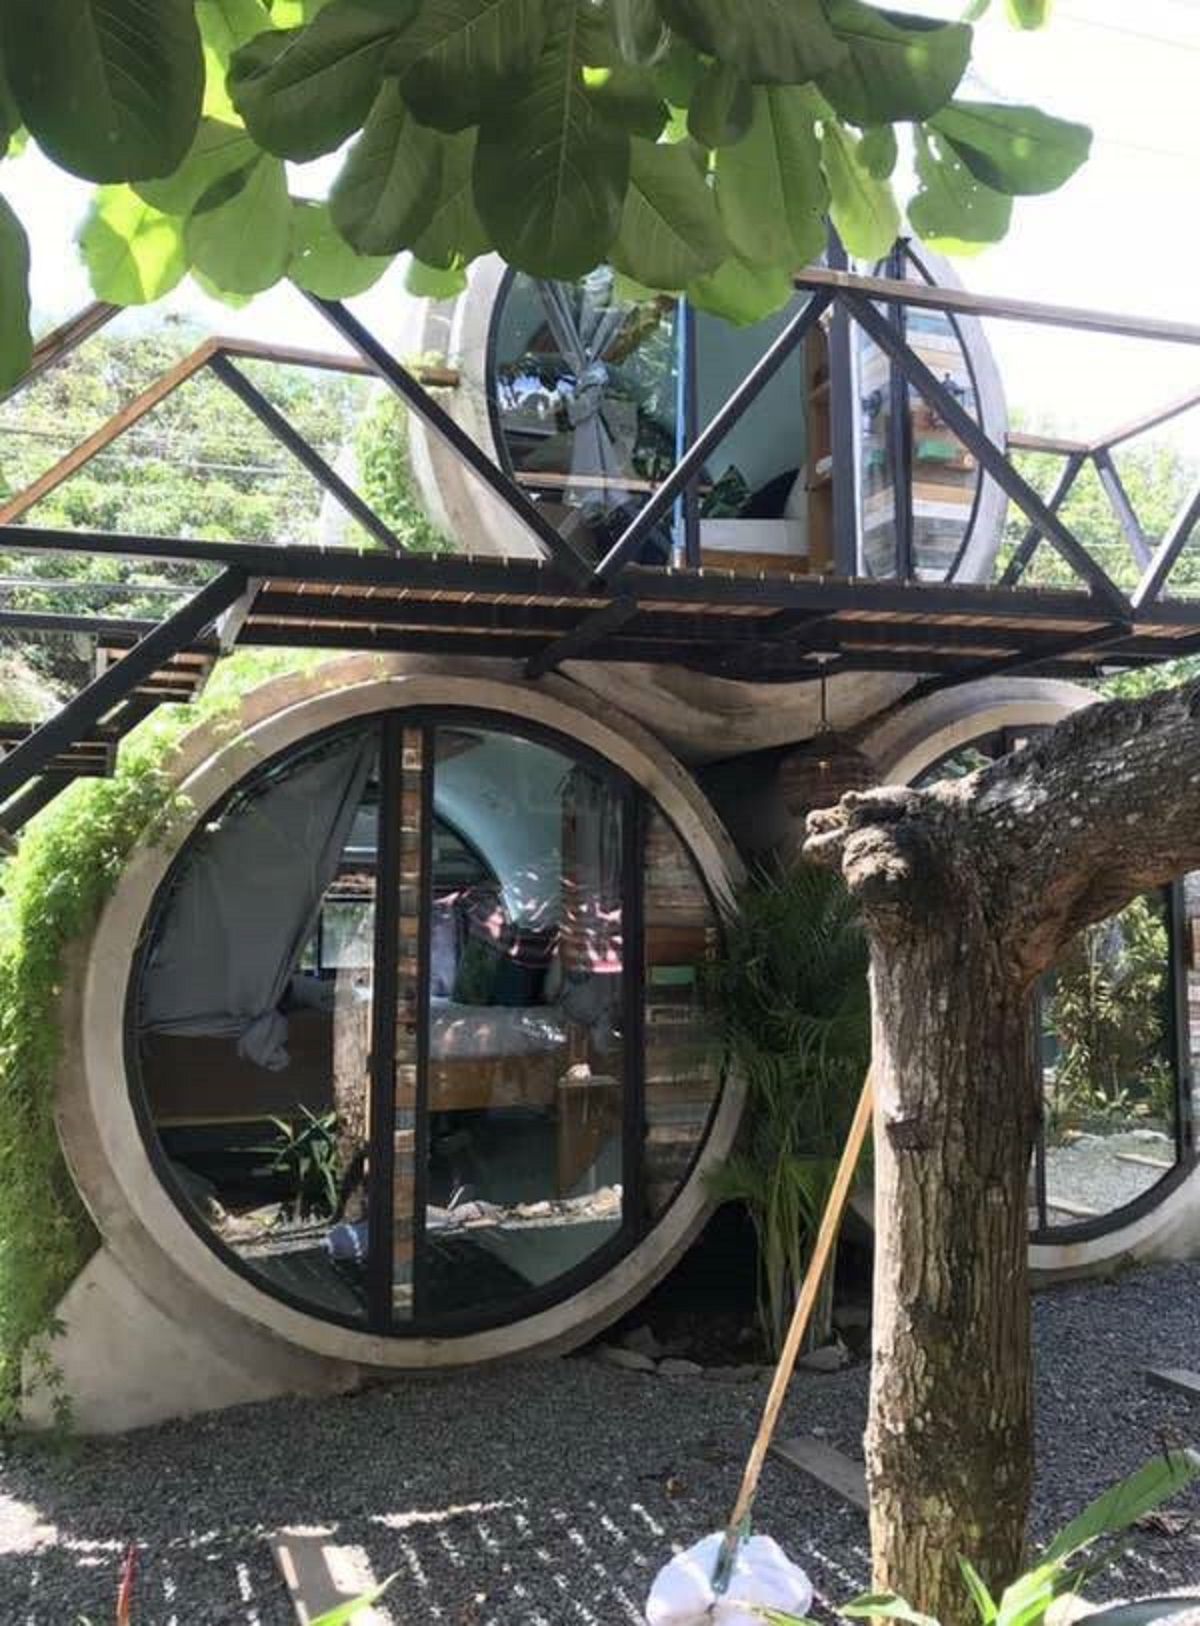 I definitely need to check out this hostel in Costa Rica, where rooms are made of recycled concrete cylinders, STAT.